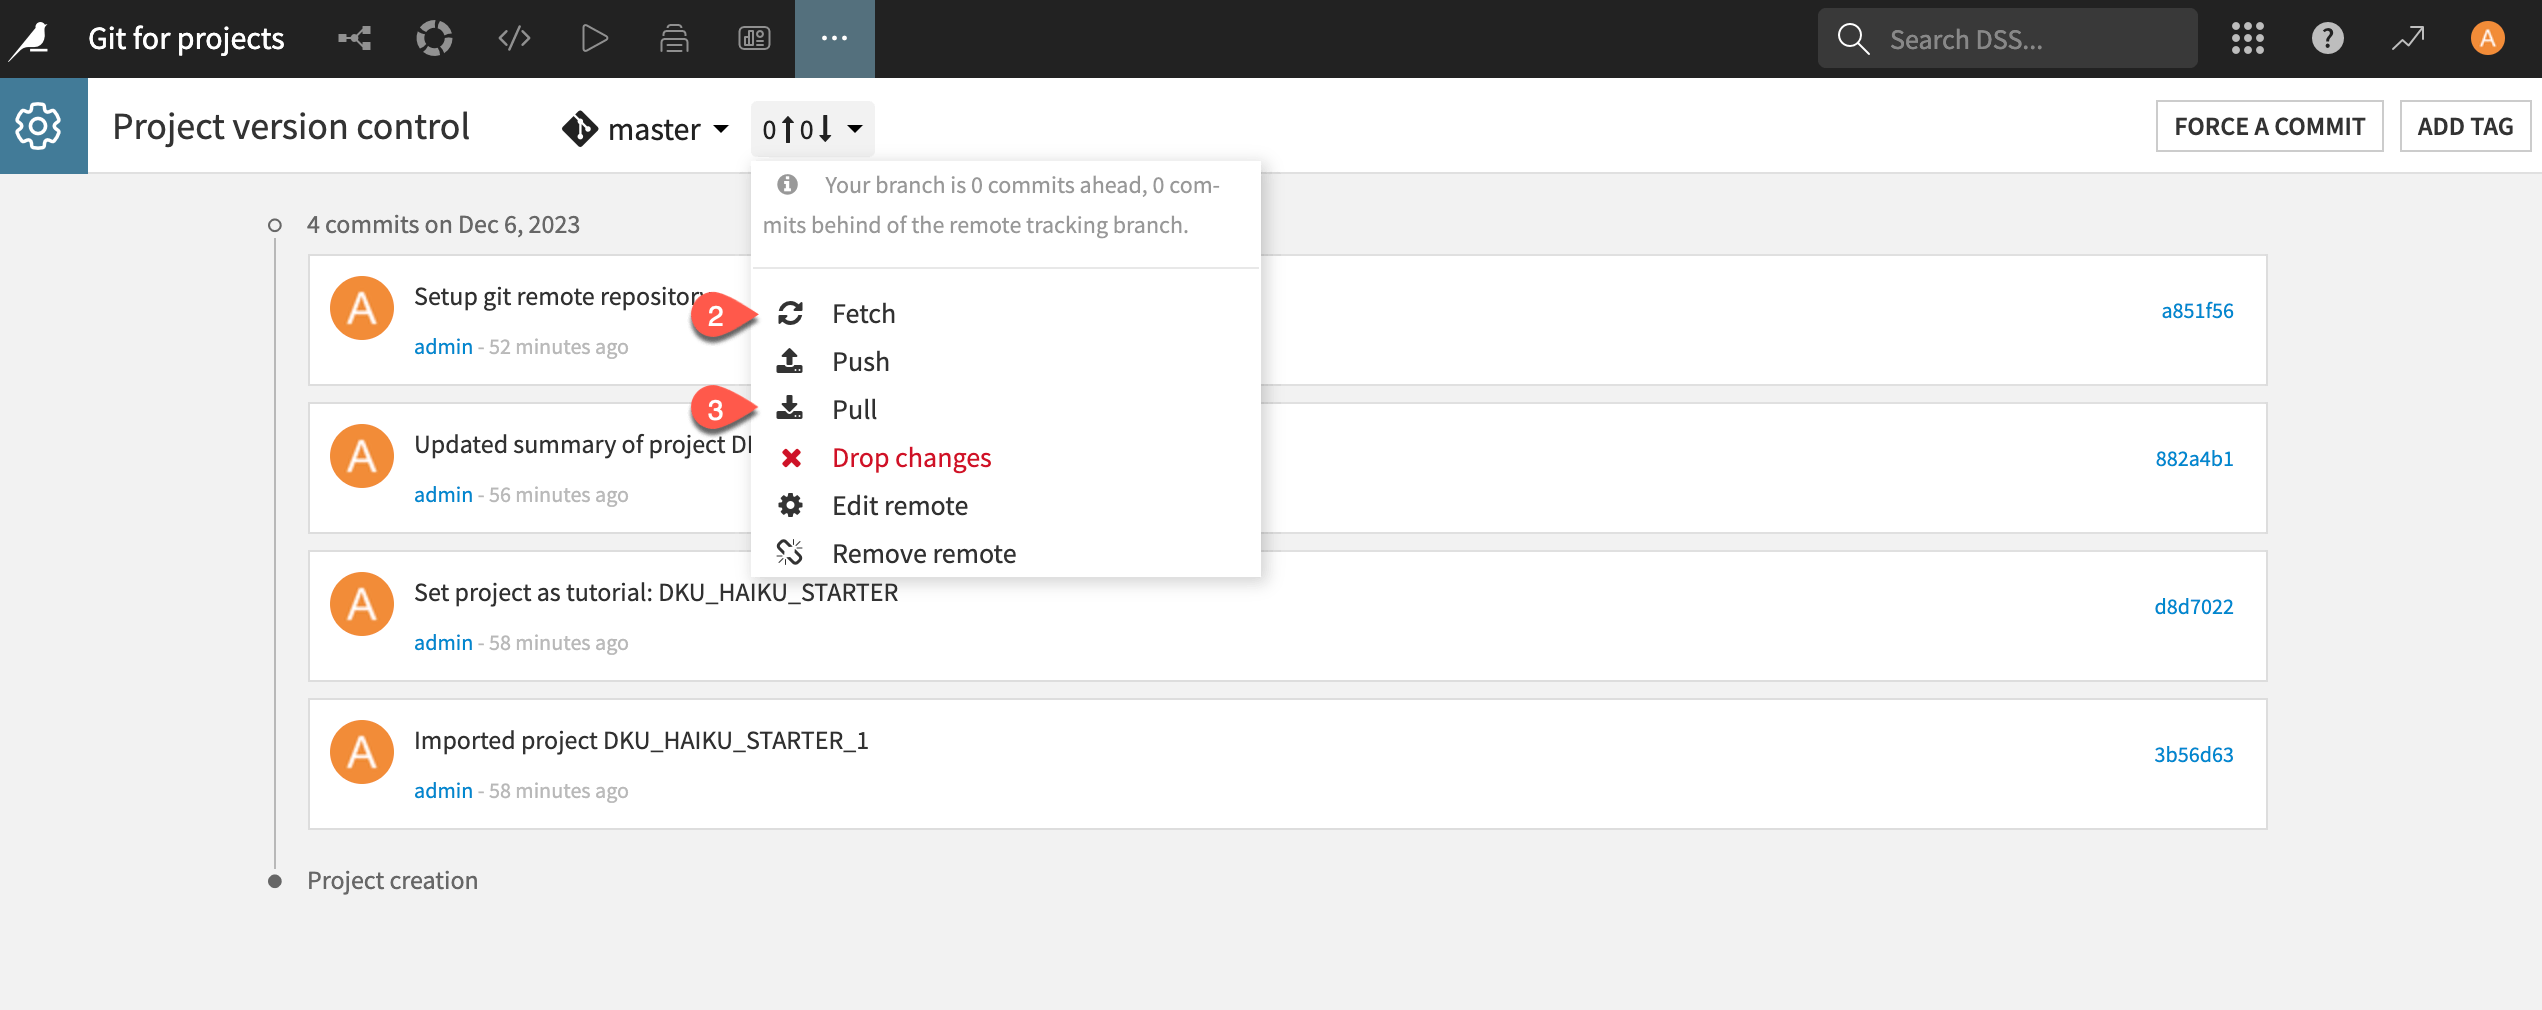 Dataiku screenshot highlighting the Fetch and Pull options of the Project version control page.